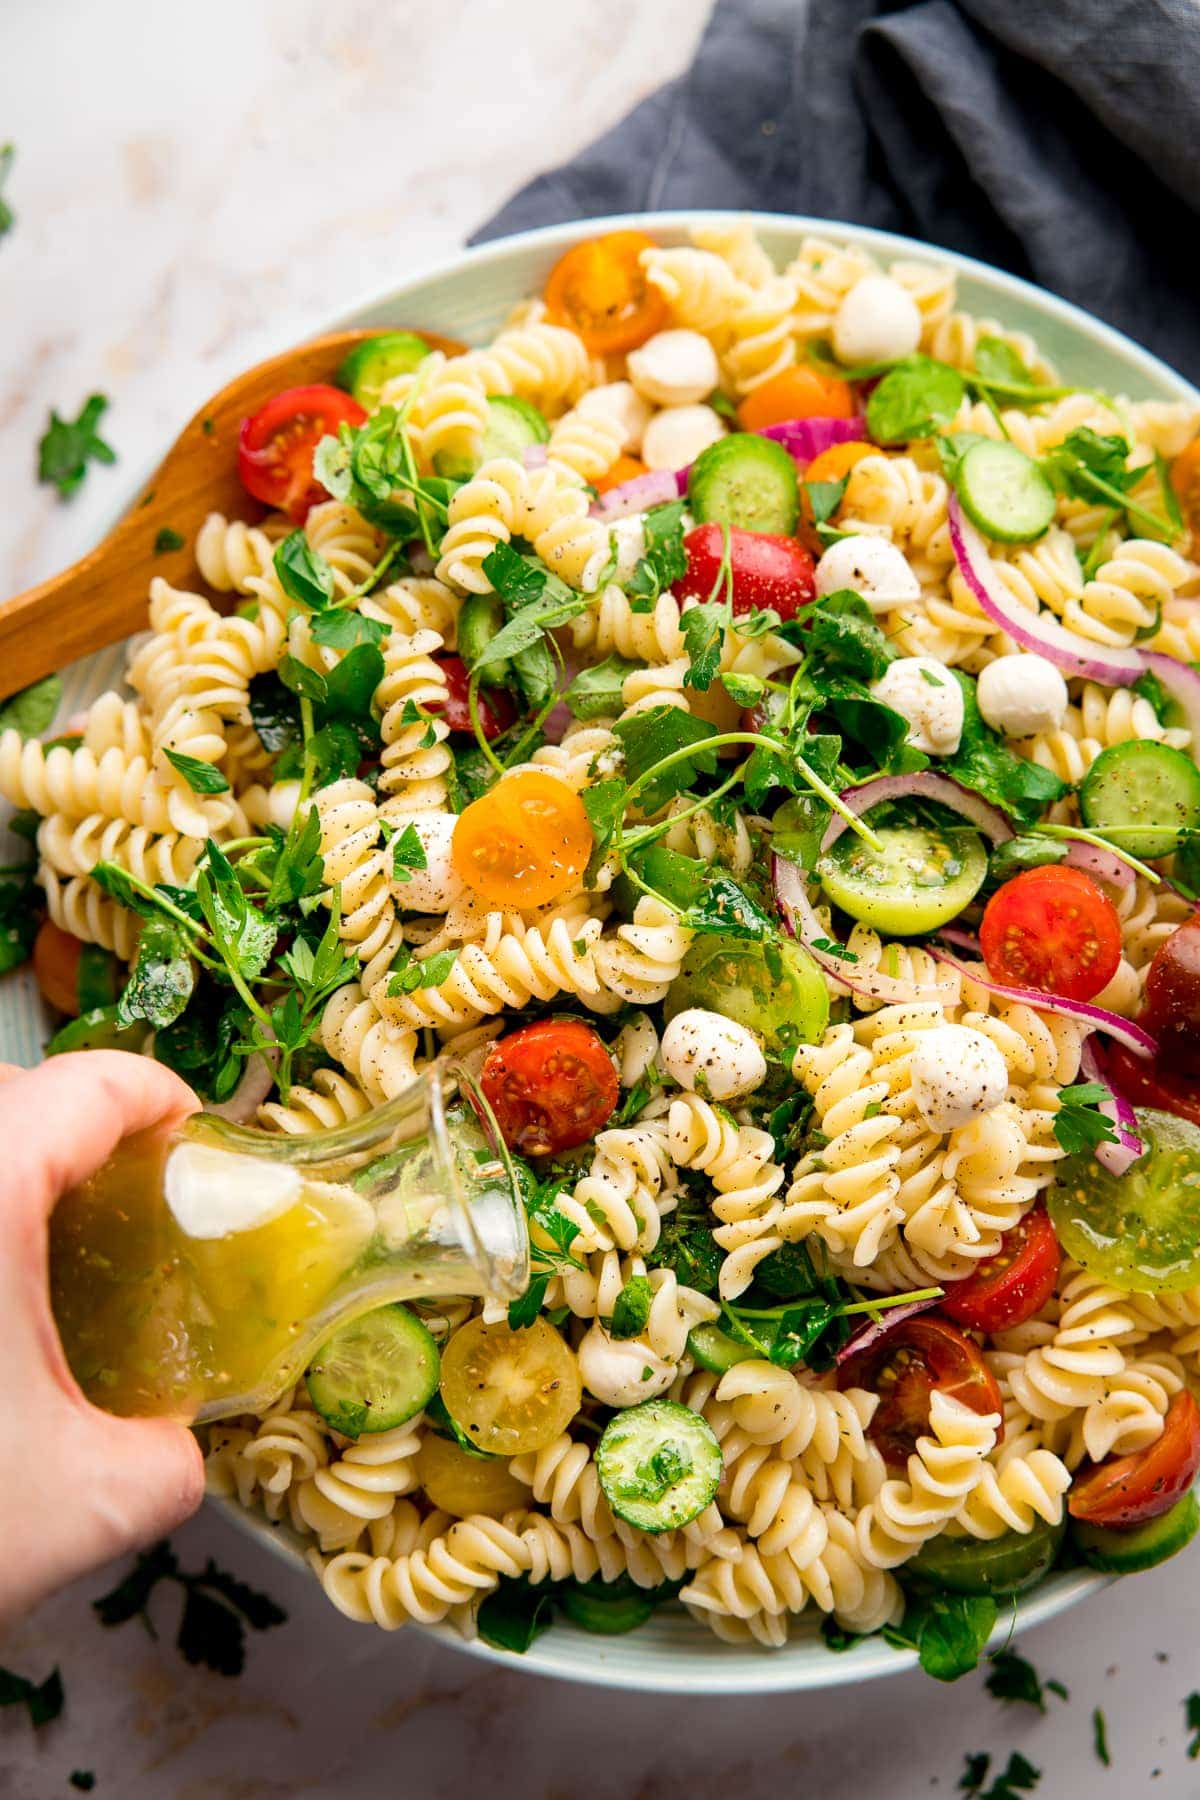 Easy Pasta Salad With The Best Italian Dressing - Nicky's Kitchen Sanctuary